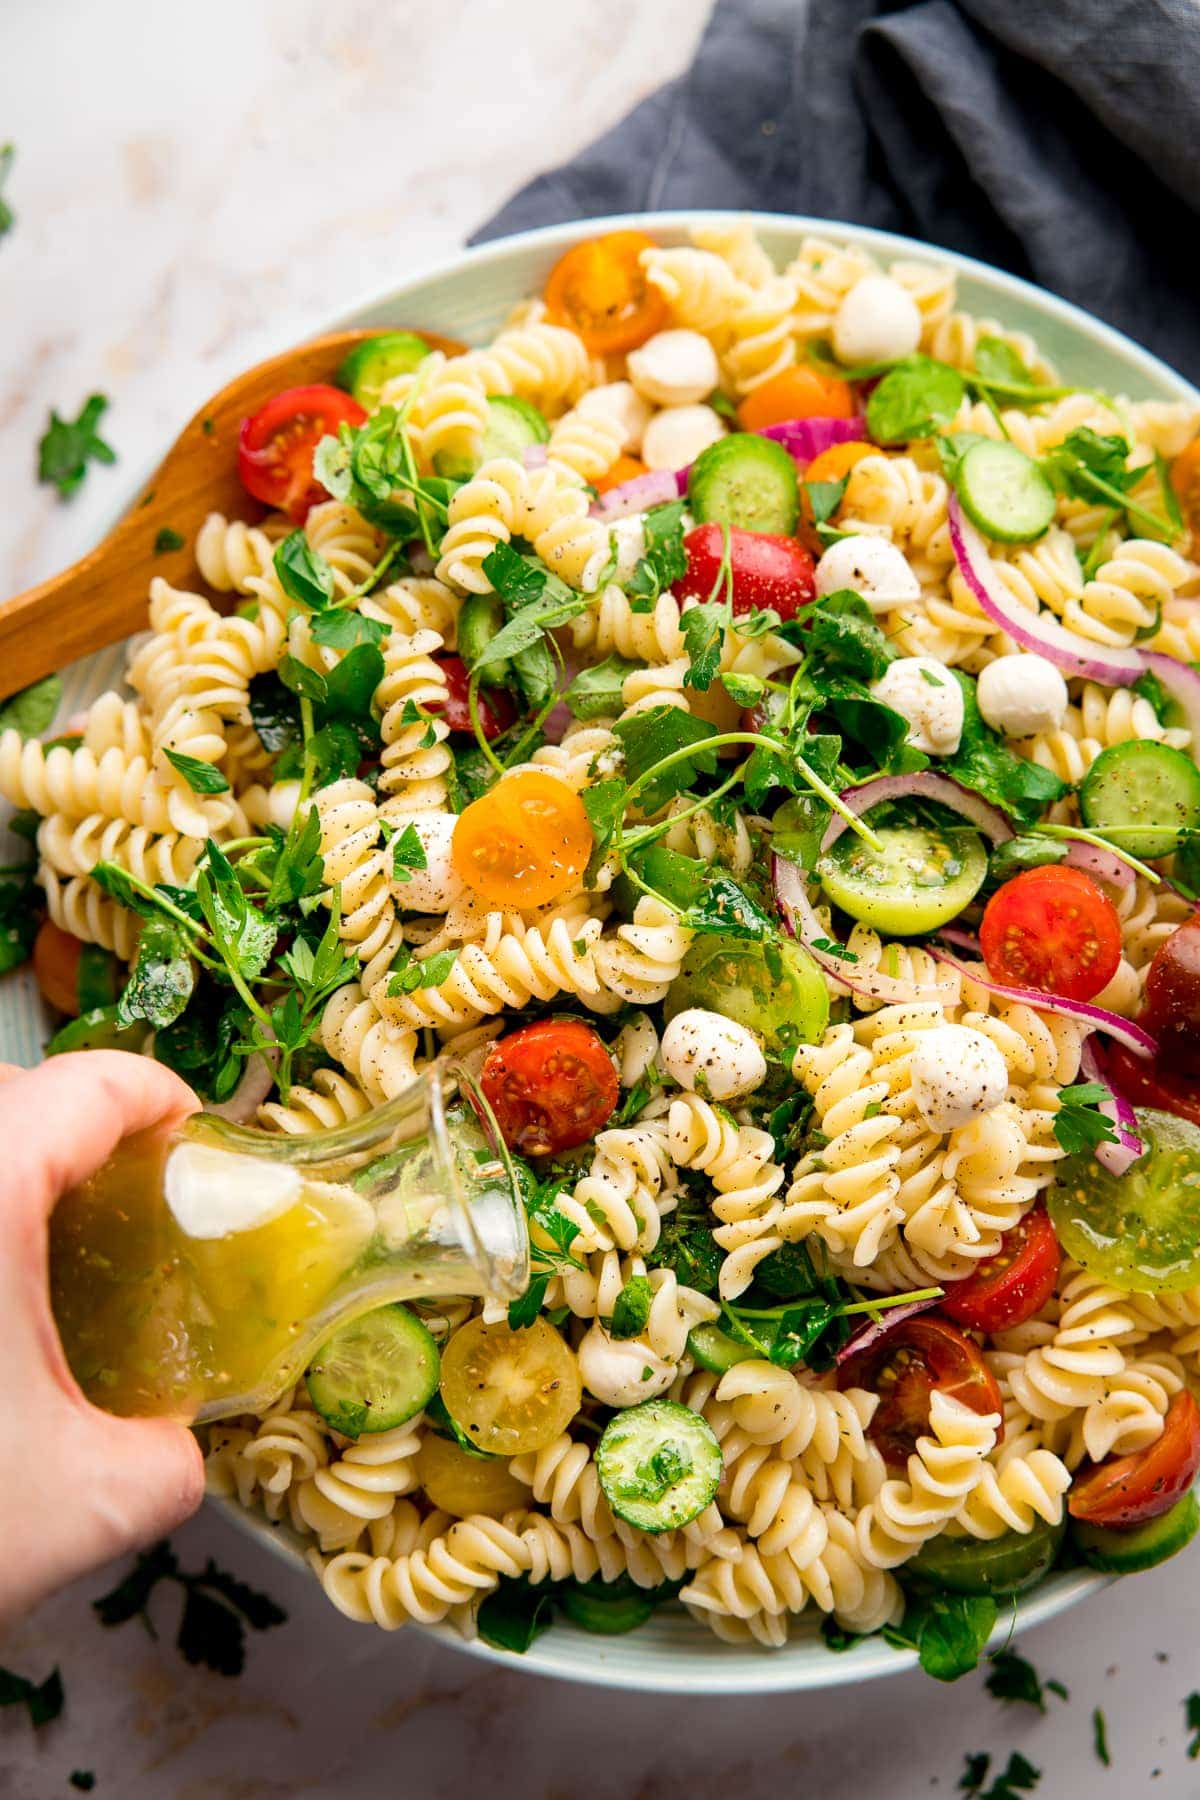 Easy Pasta Salad With The Best Italian Dressing - Nicky's Kitchen Sanctuary